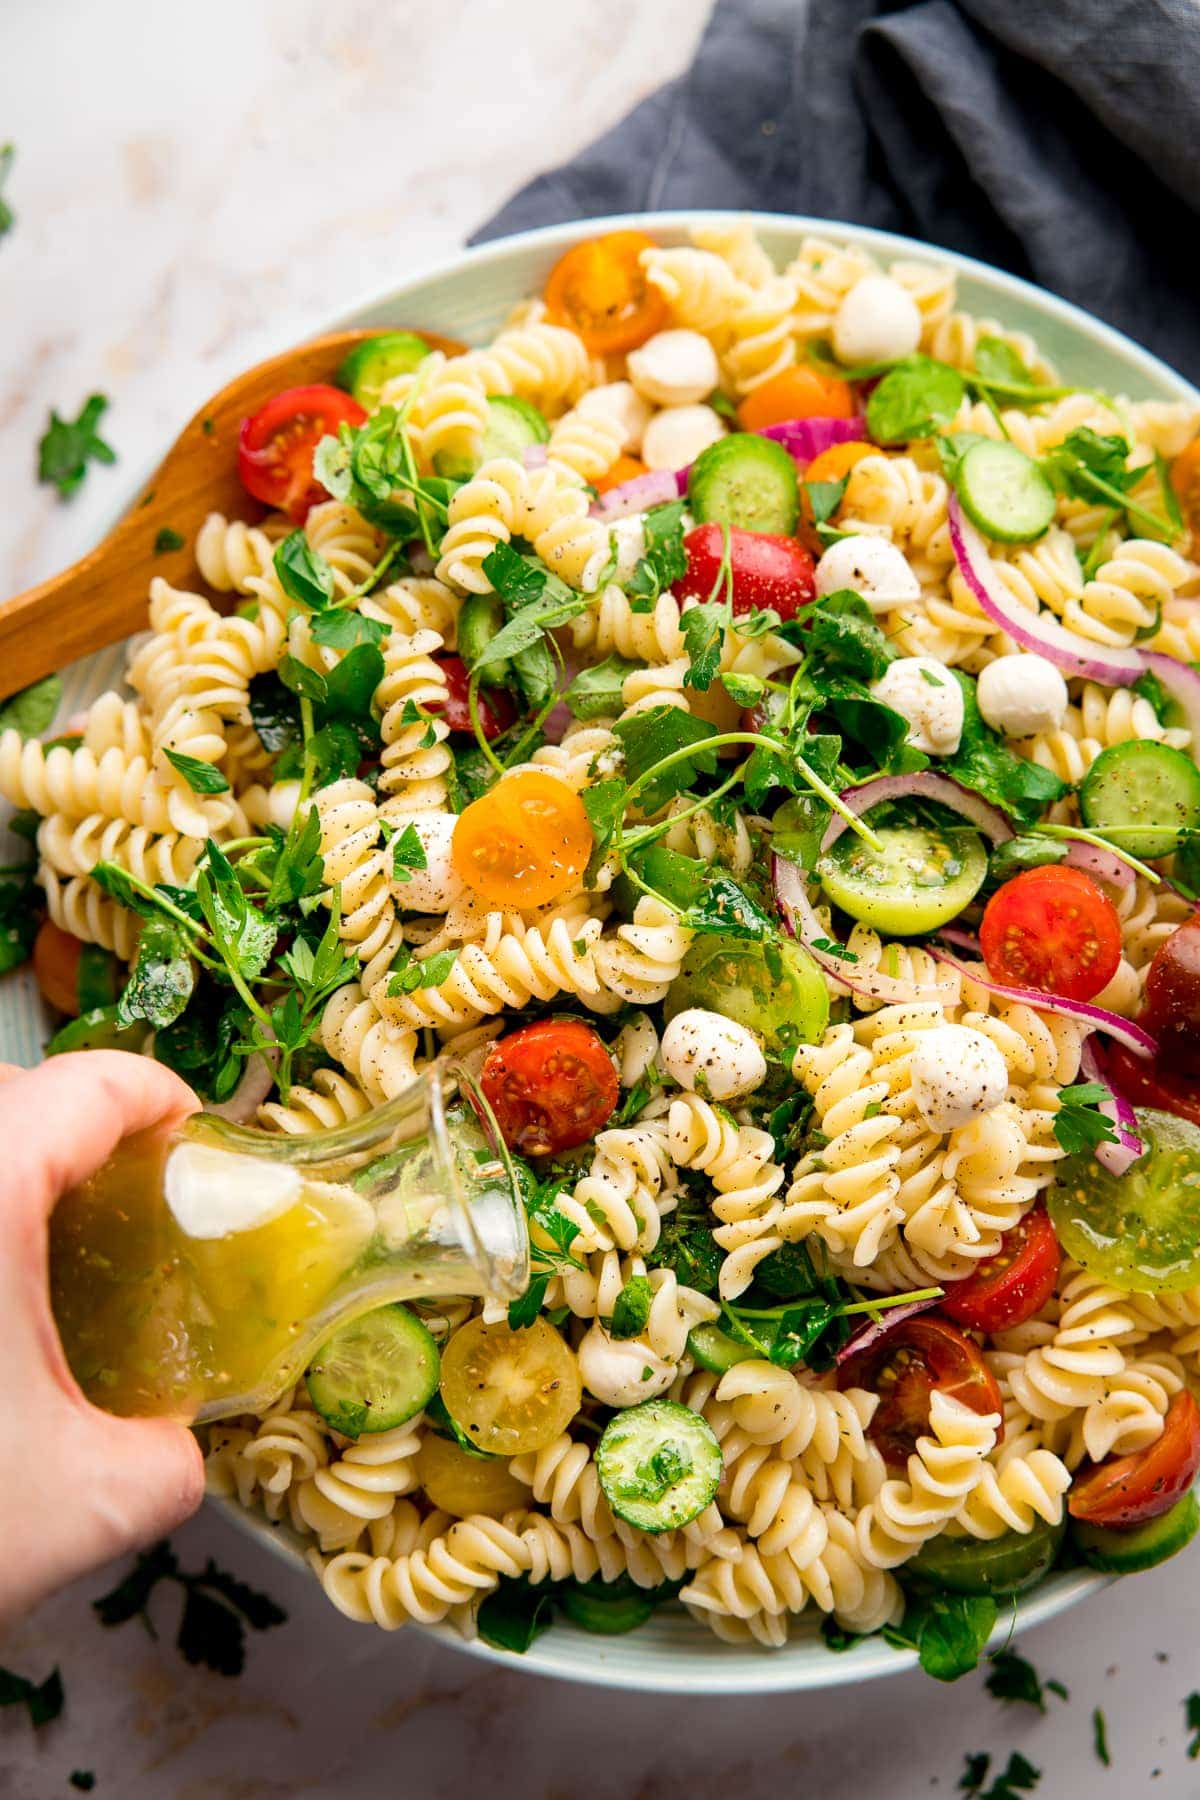 Easy Pasta Salad With The Best Italian Dressing - Nicky's Kitchen Sanctuary